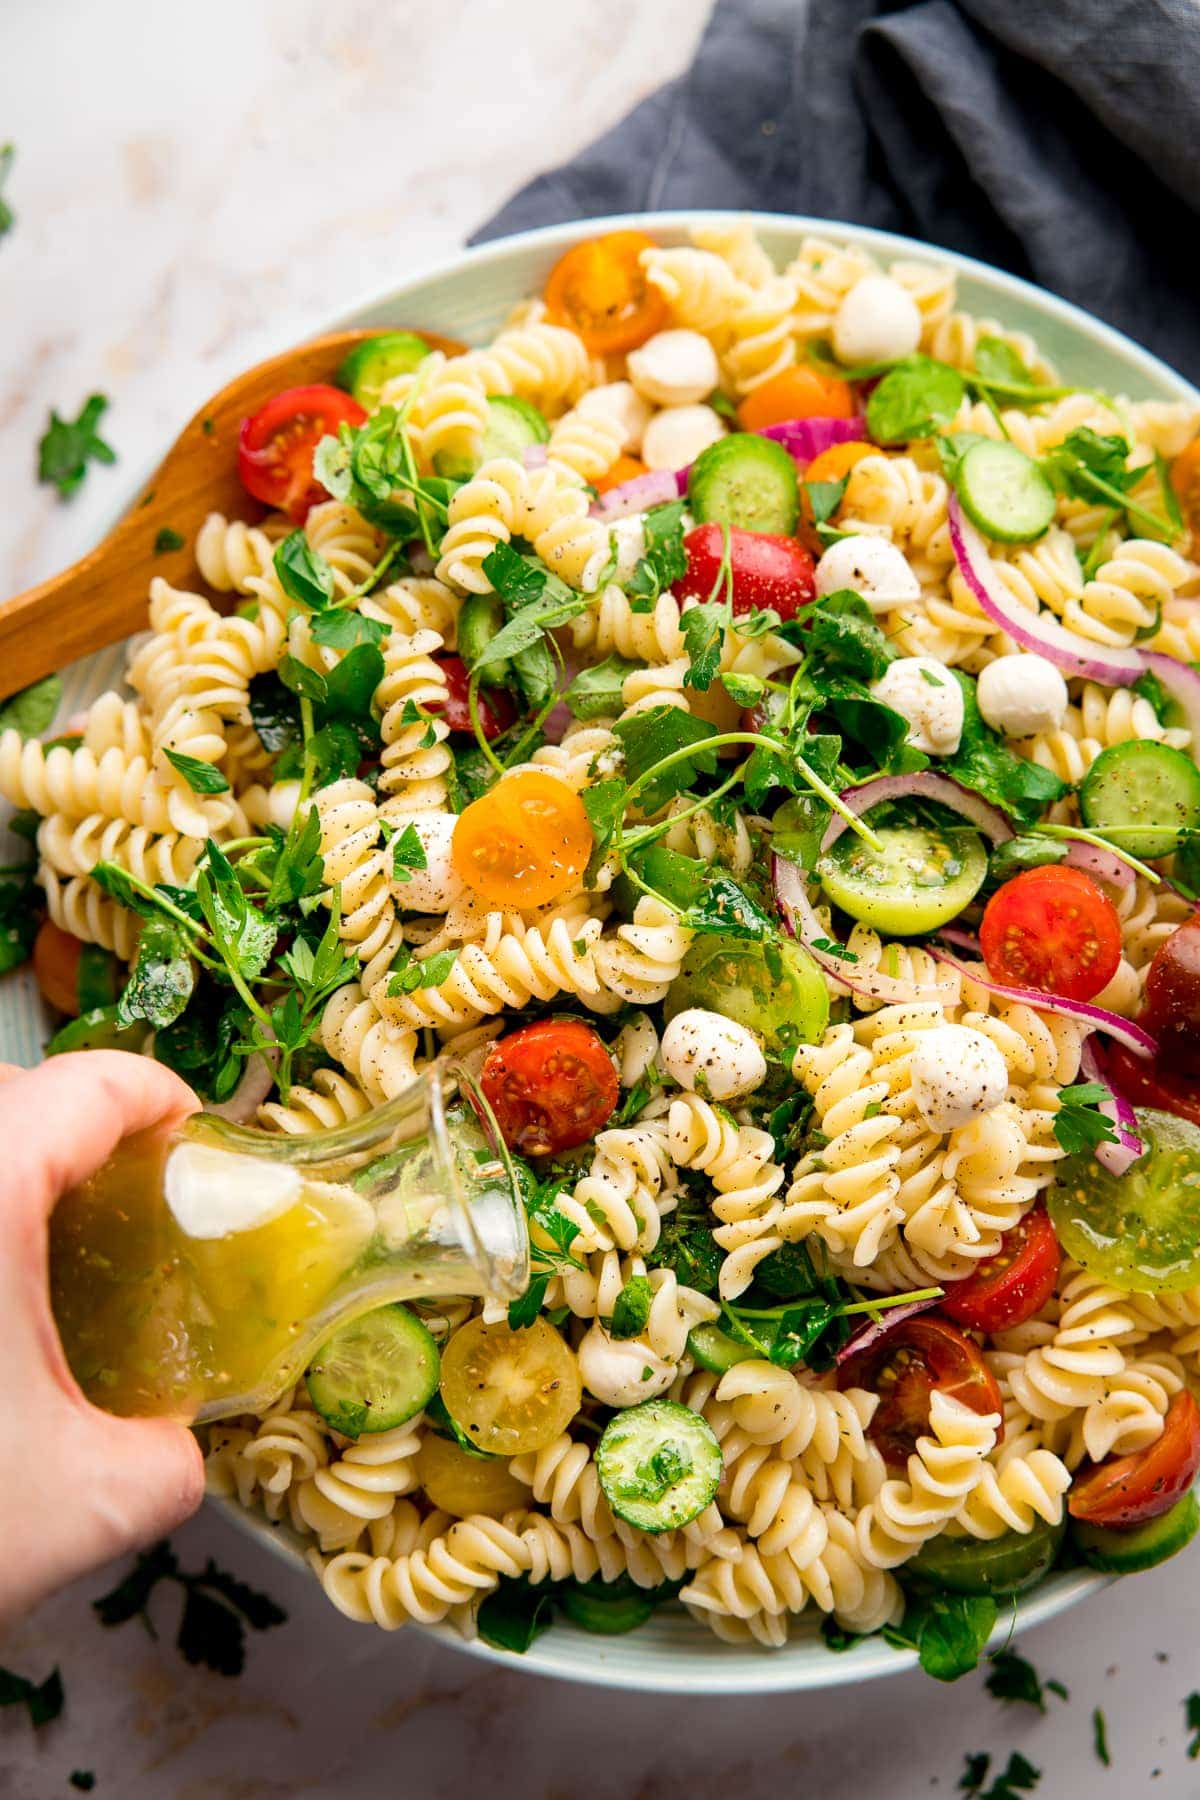 Easy Pasta Salad With The Best Italian Dressing - Nicky's Kitchen Sanctuary